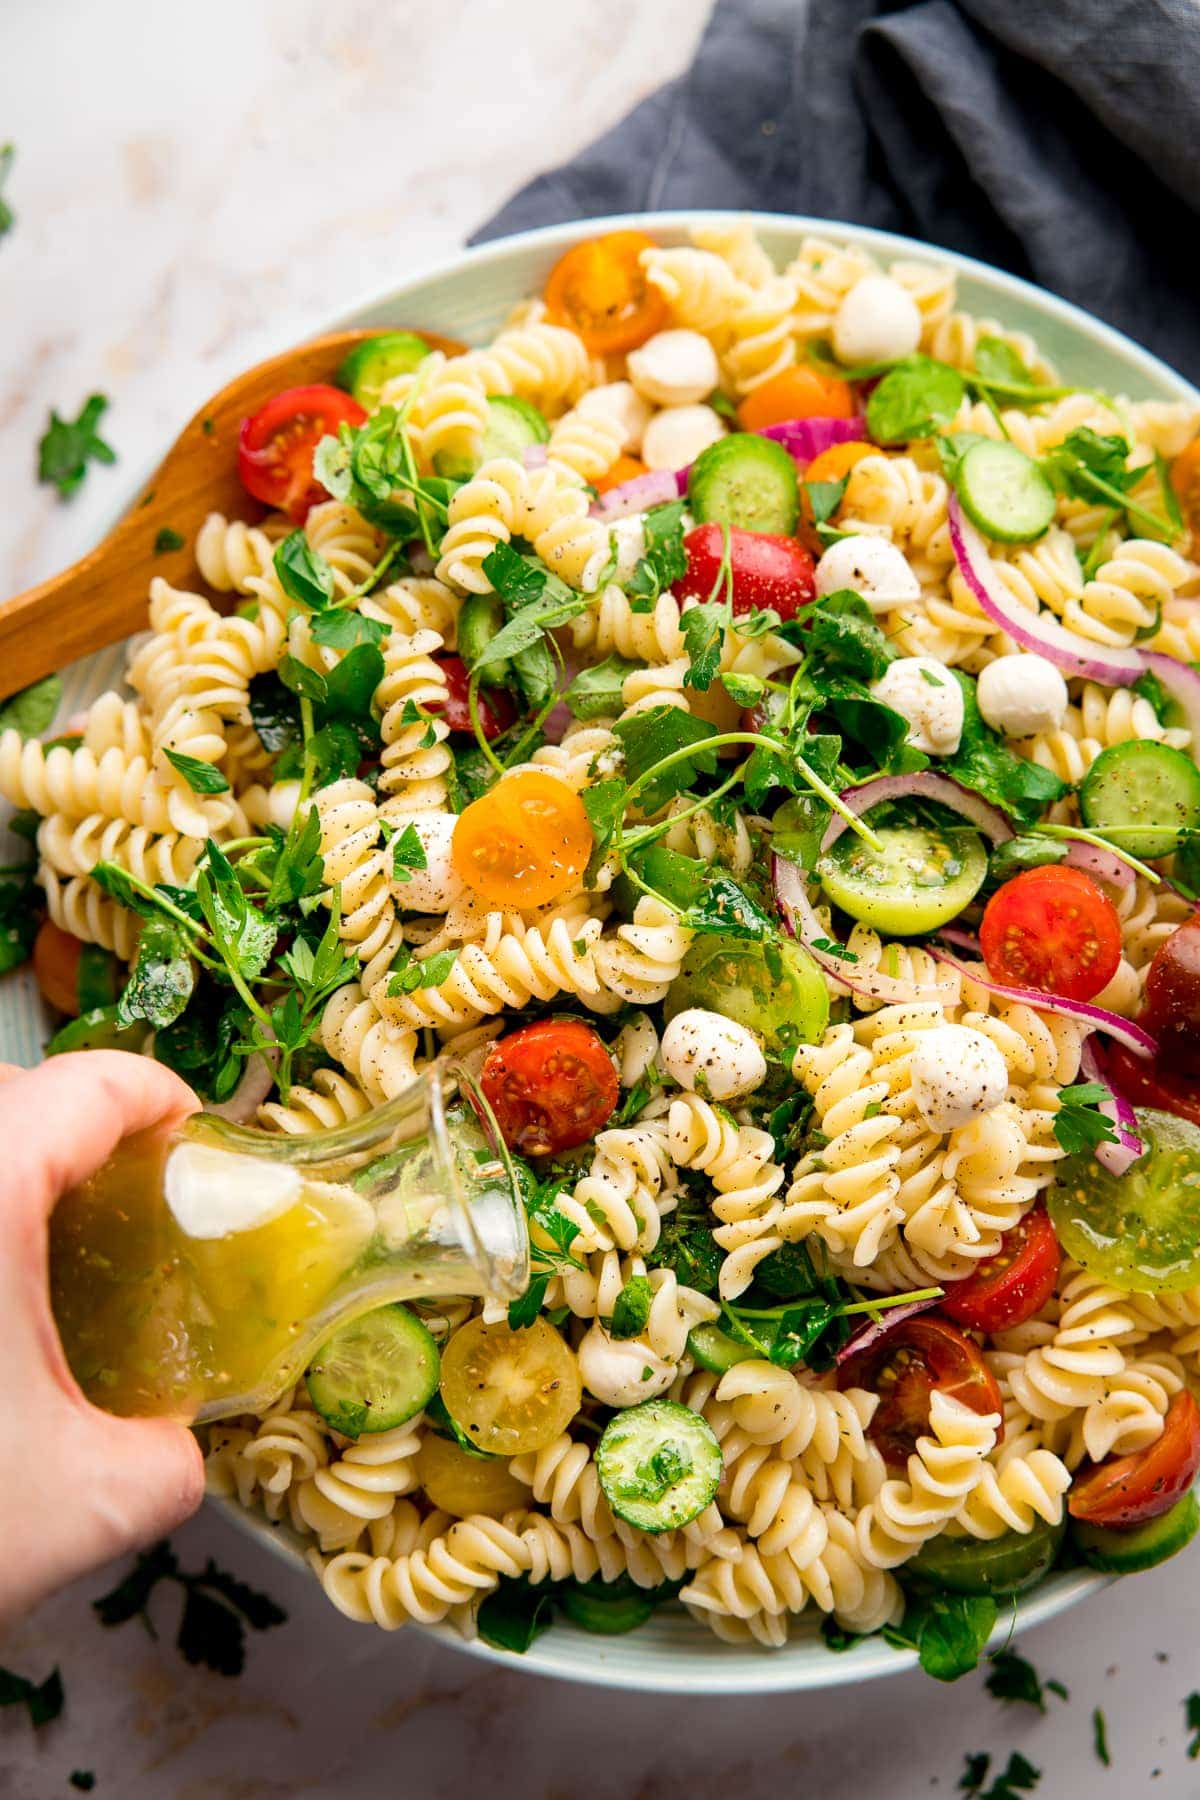 Easy Pasta Salad With The Best Italian Dressing - Nicky's Kitchen Sanctuary